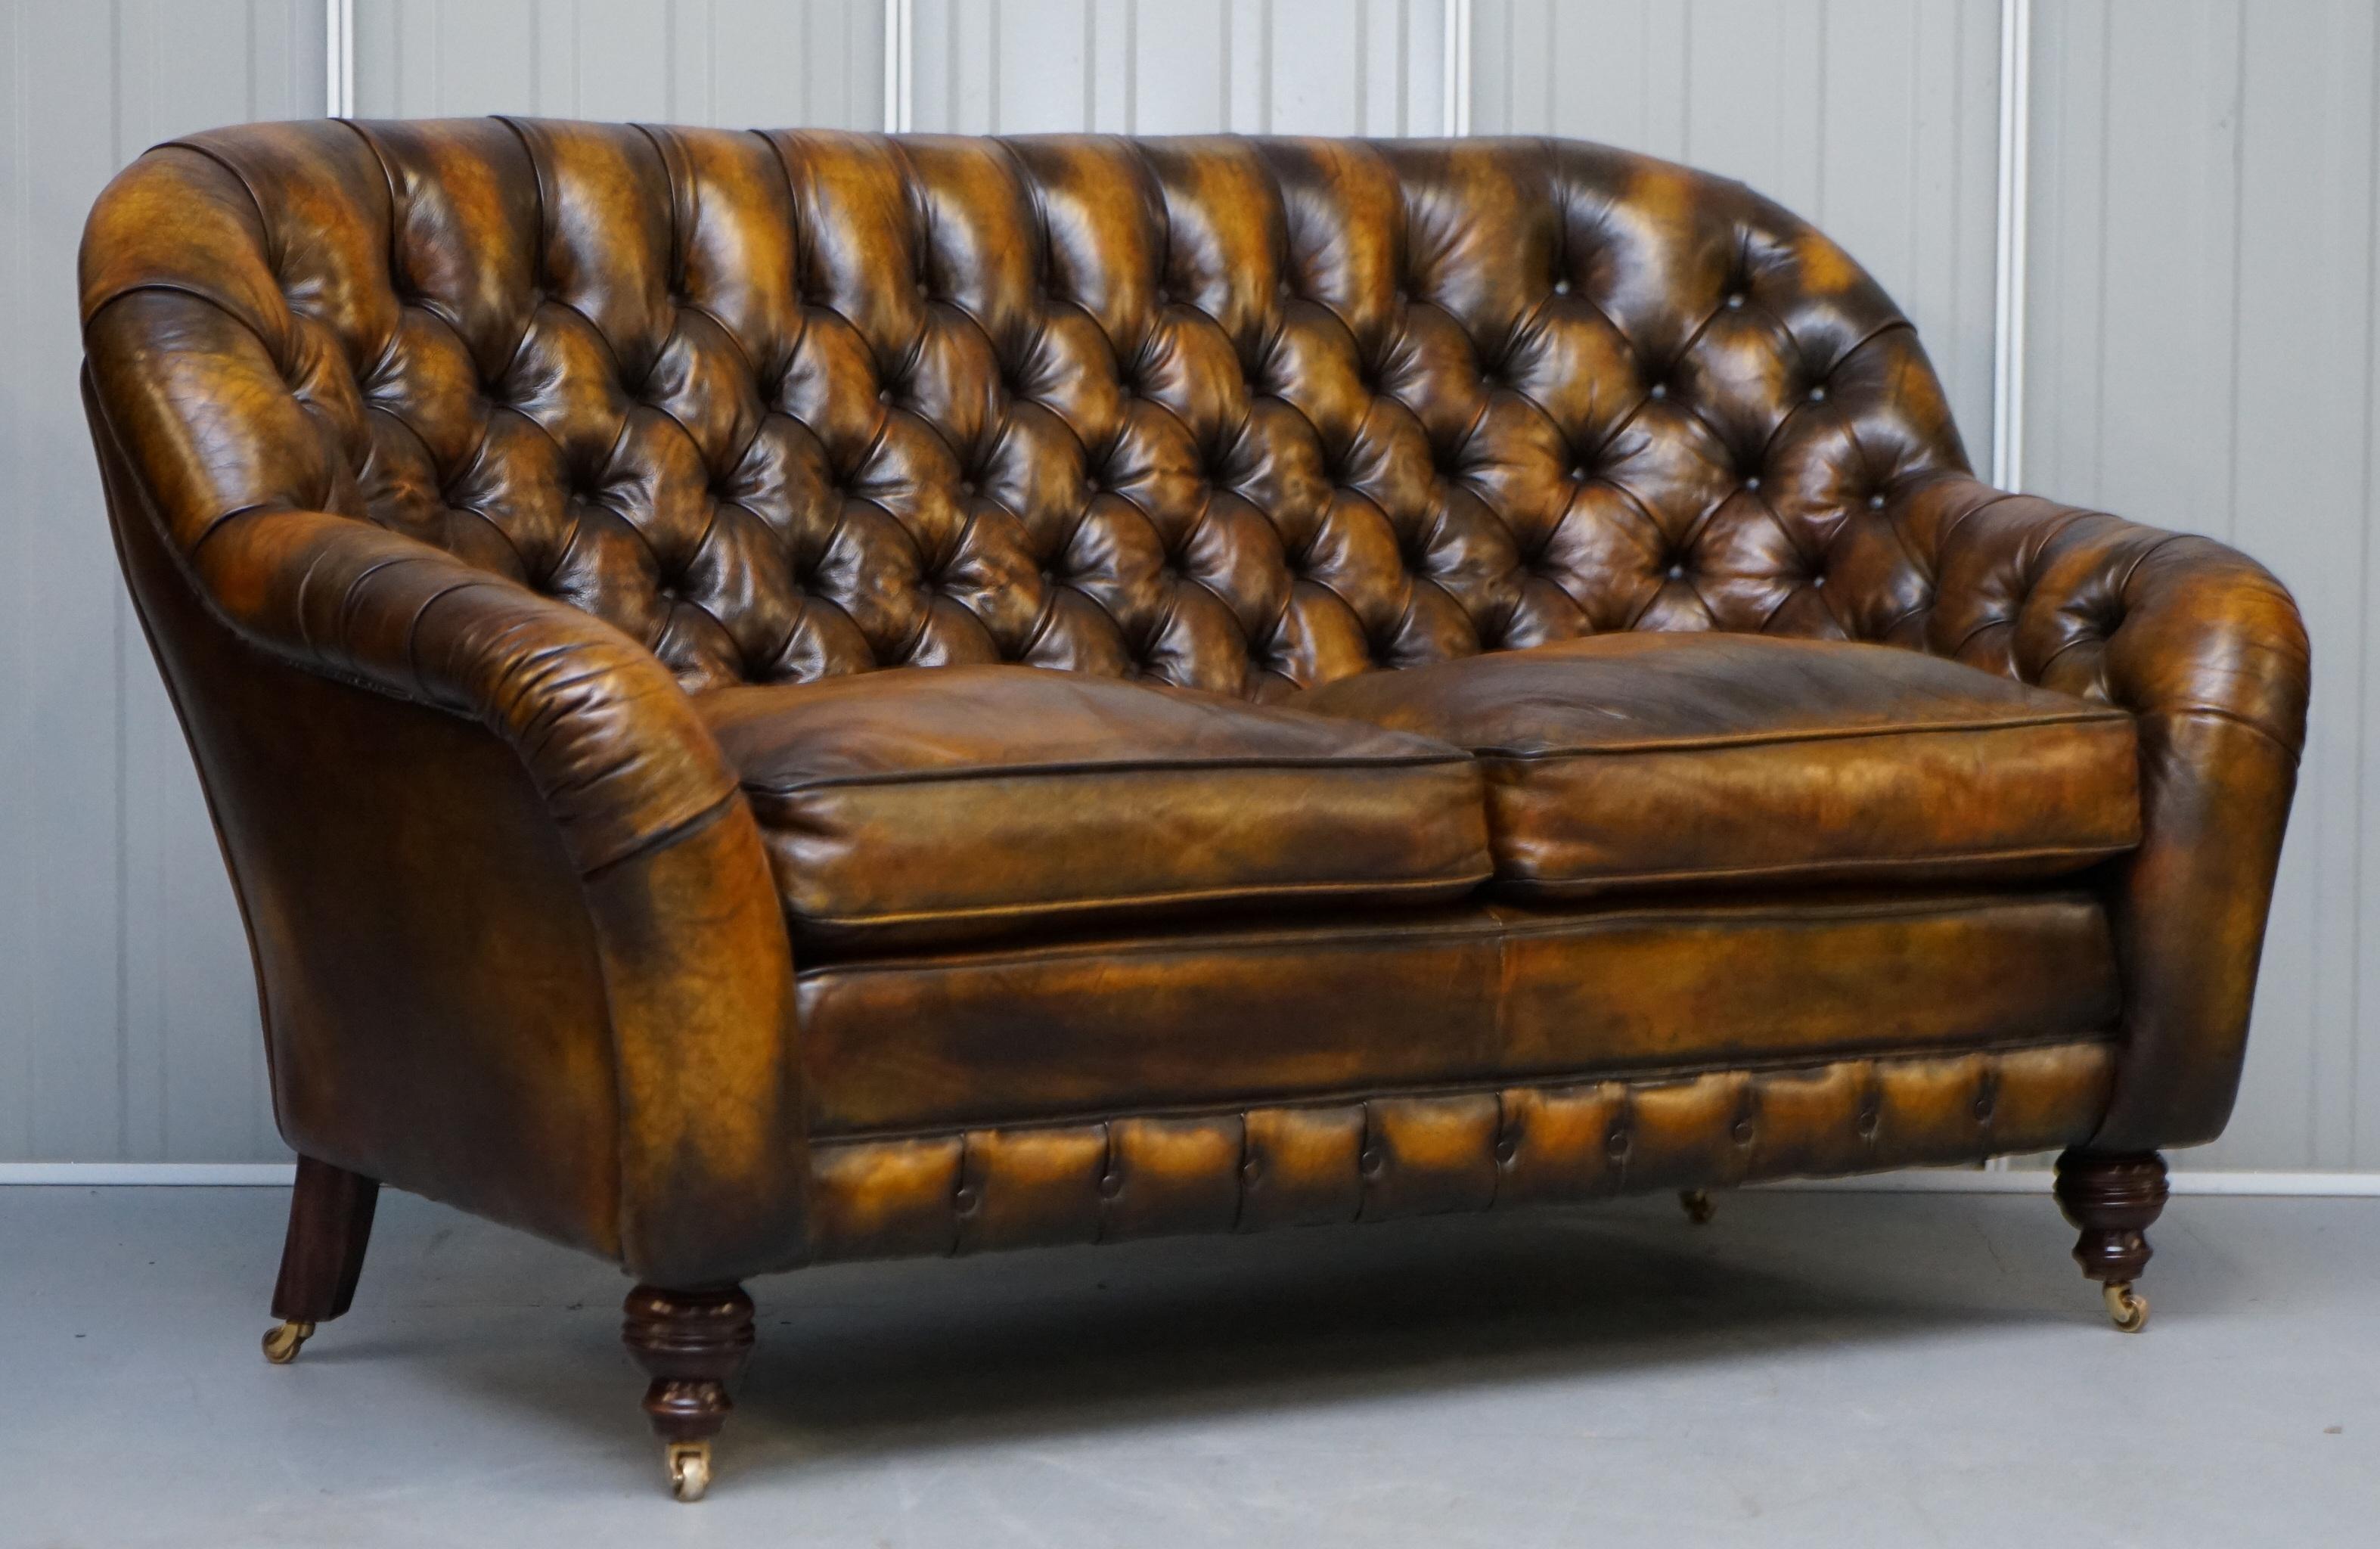 We are delighted to offer for sale 1 of 2 fully restored hand dyed Whisky brown leather chesterfield two-seat sofas with feather filled cushions

This auction is for one with the option to buy two, you simply need to change the quantity from 1 to